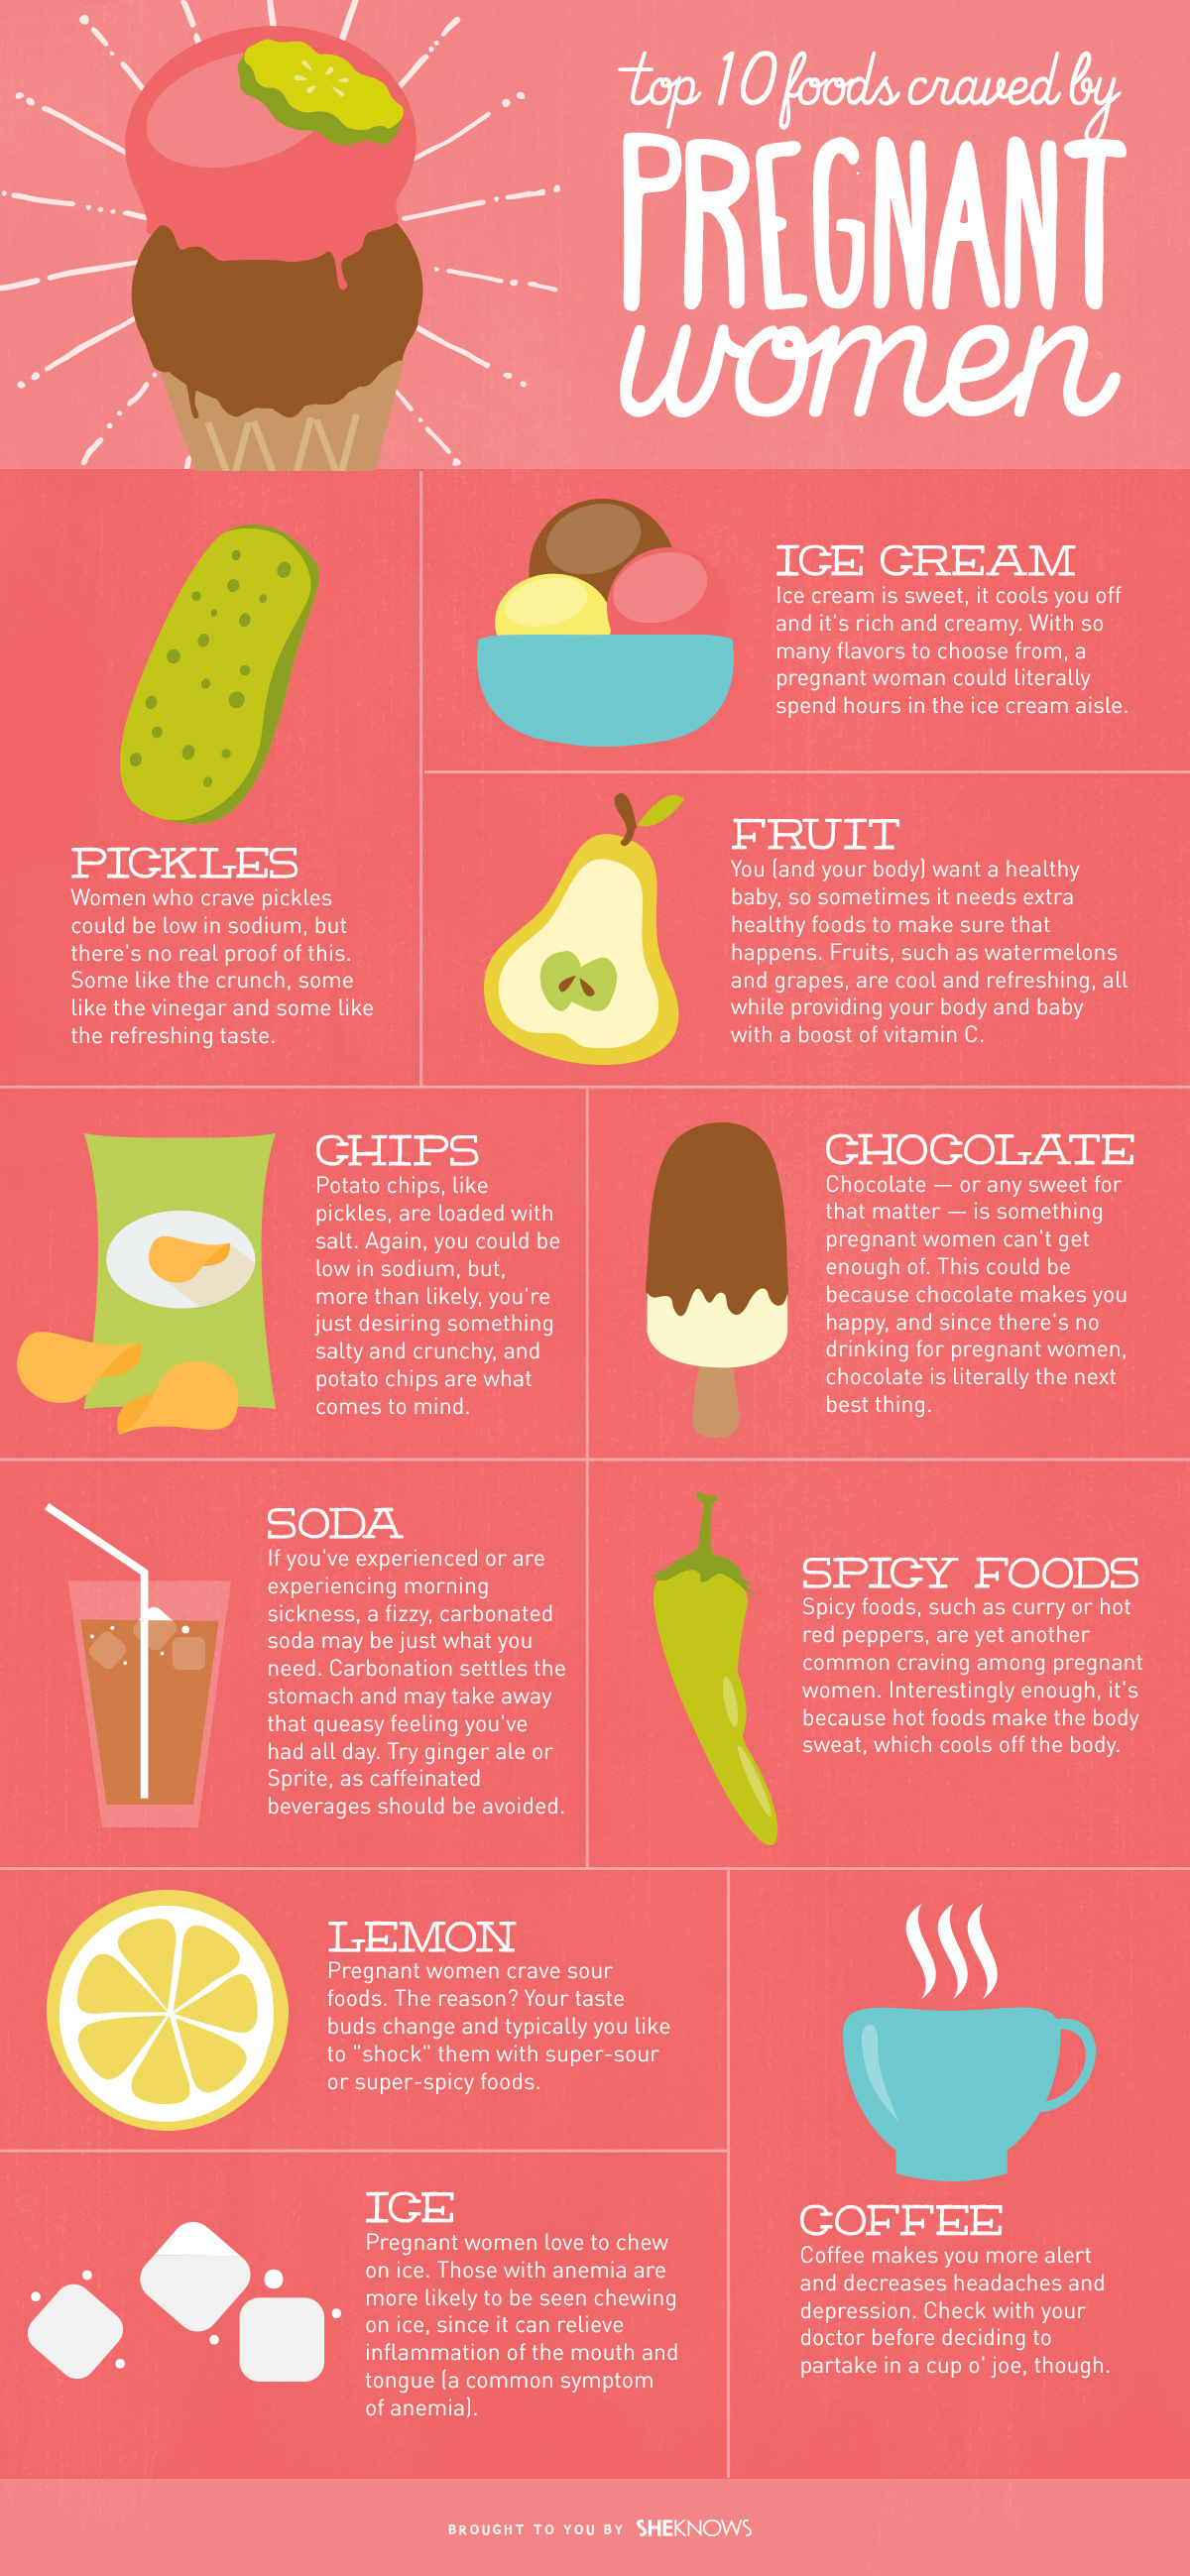 20 Foods Most Craved By Pregnant Women